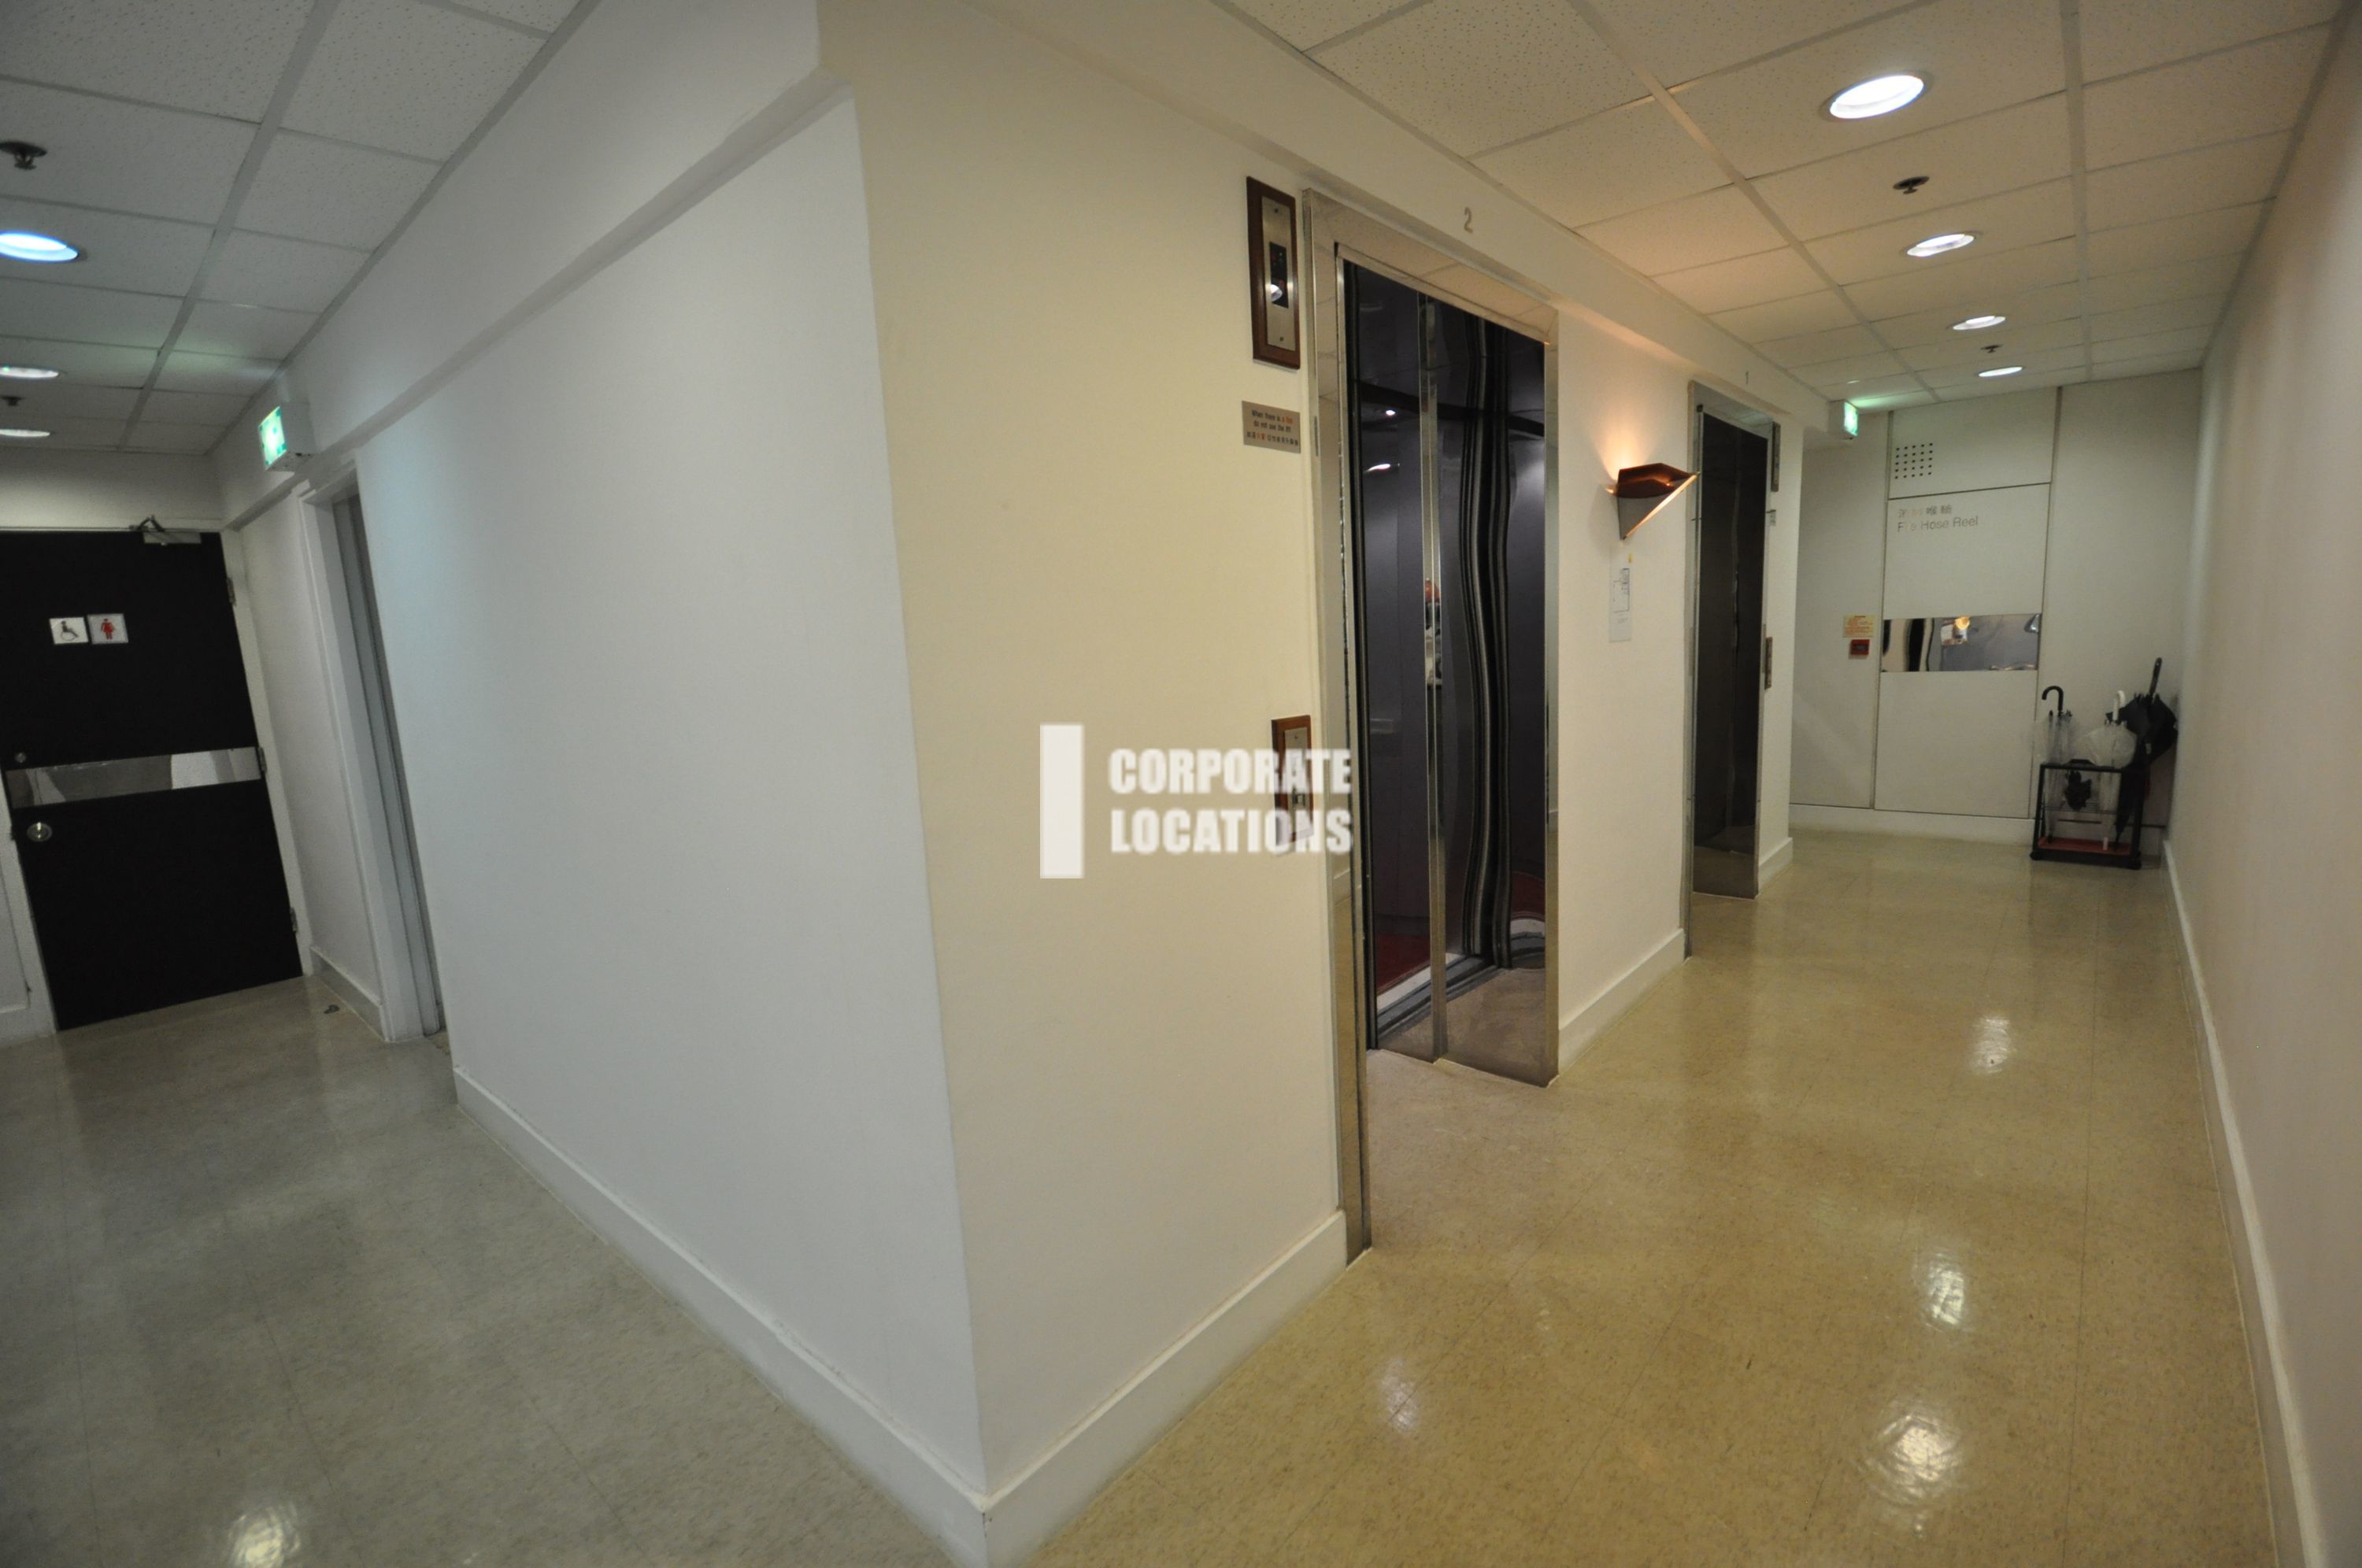 Lease offices in LKF 29 - Central